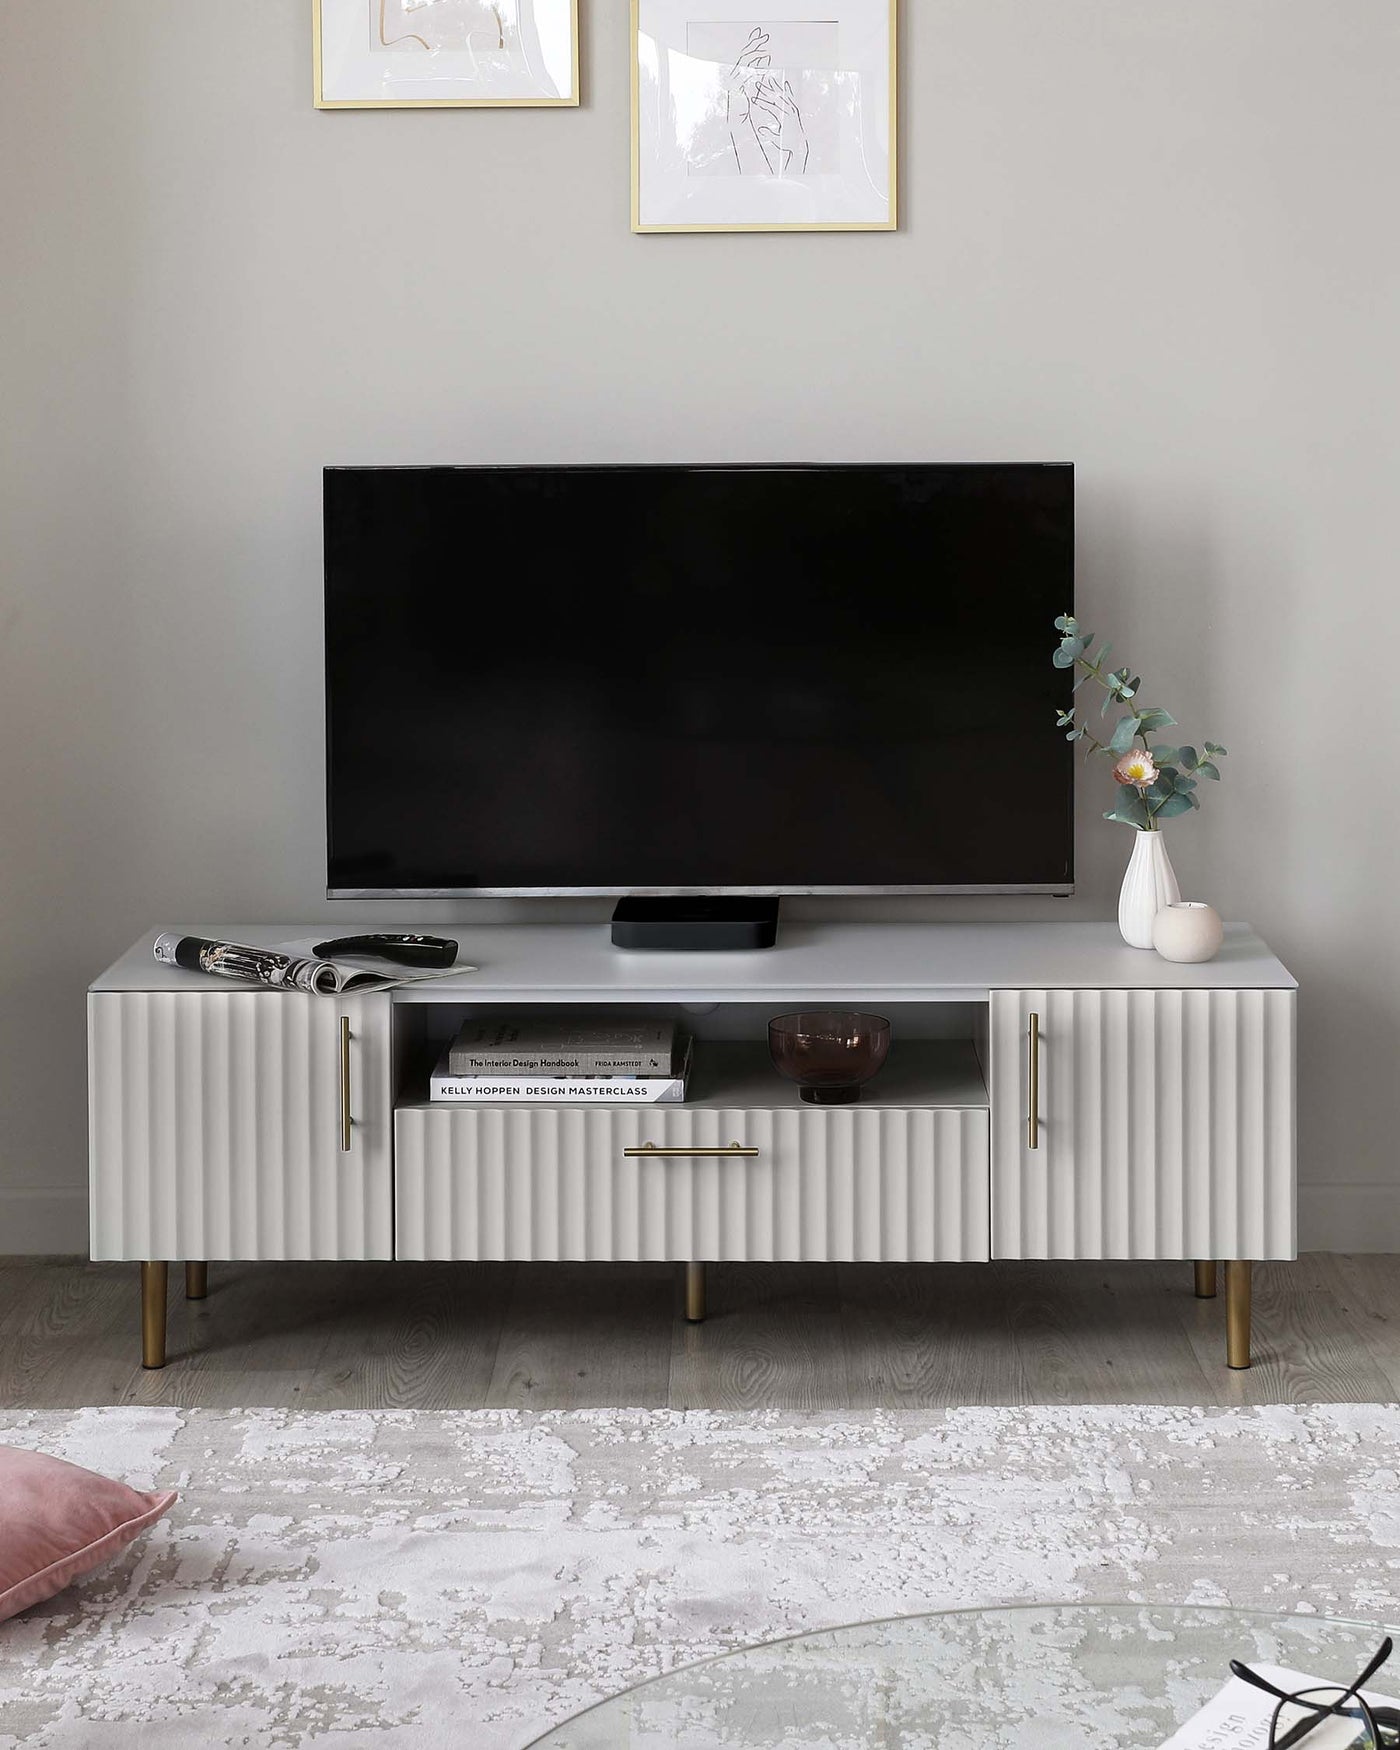 A modern white TV stand with textured front panels and gold-finished handles, featuring an open shelf and two compartments. The stand is supported by four angled wooden legs with gold-coloured tips matching the handles.